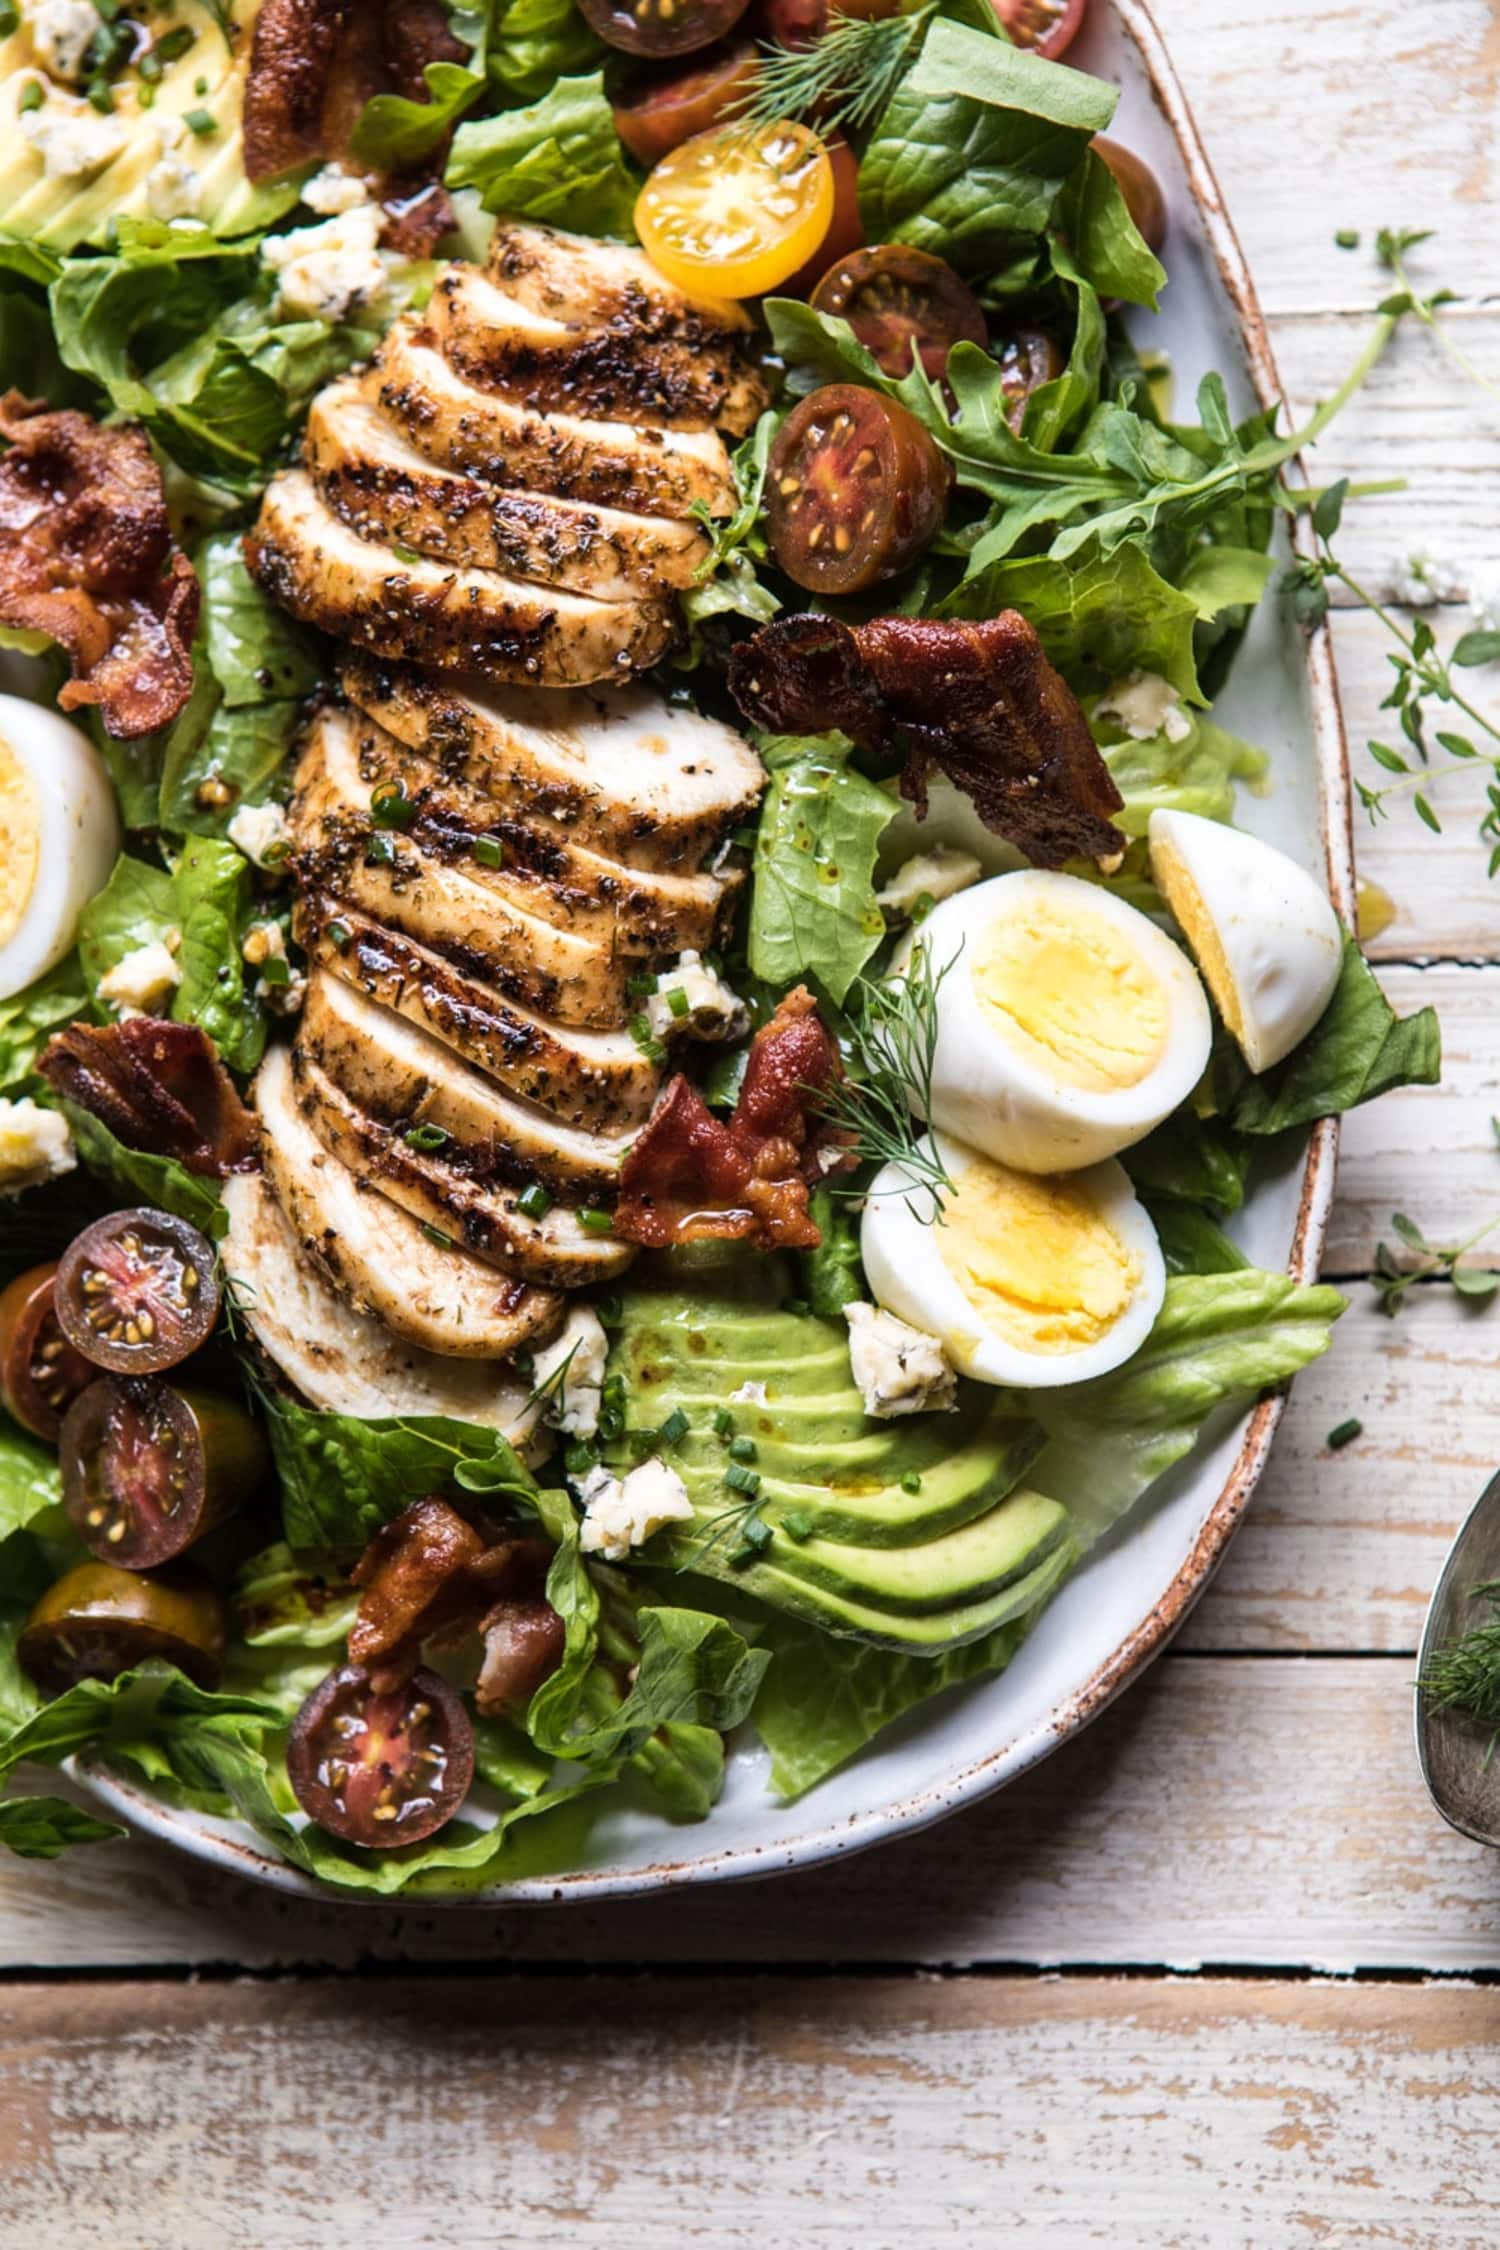 This Balsamic Chicken Cobb Salad Is Perfect for Summer | Kitchn